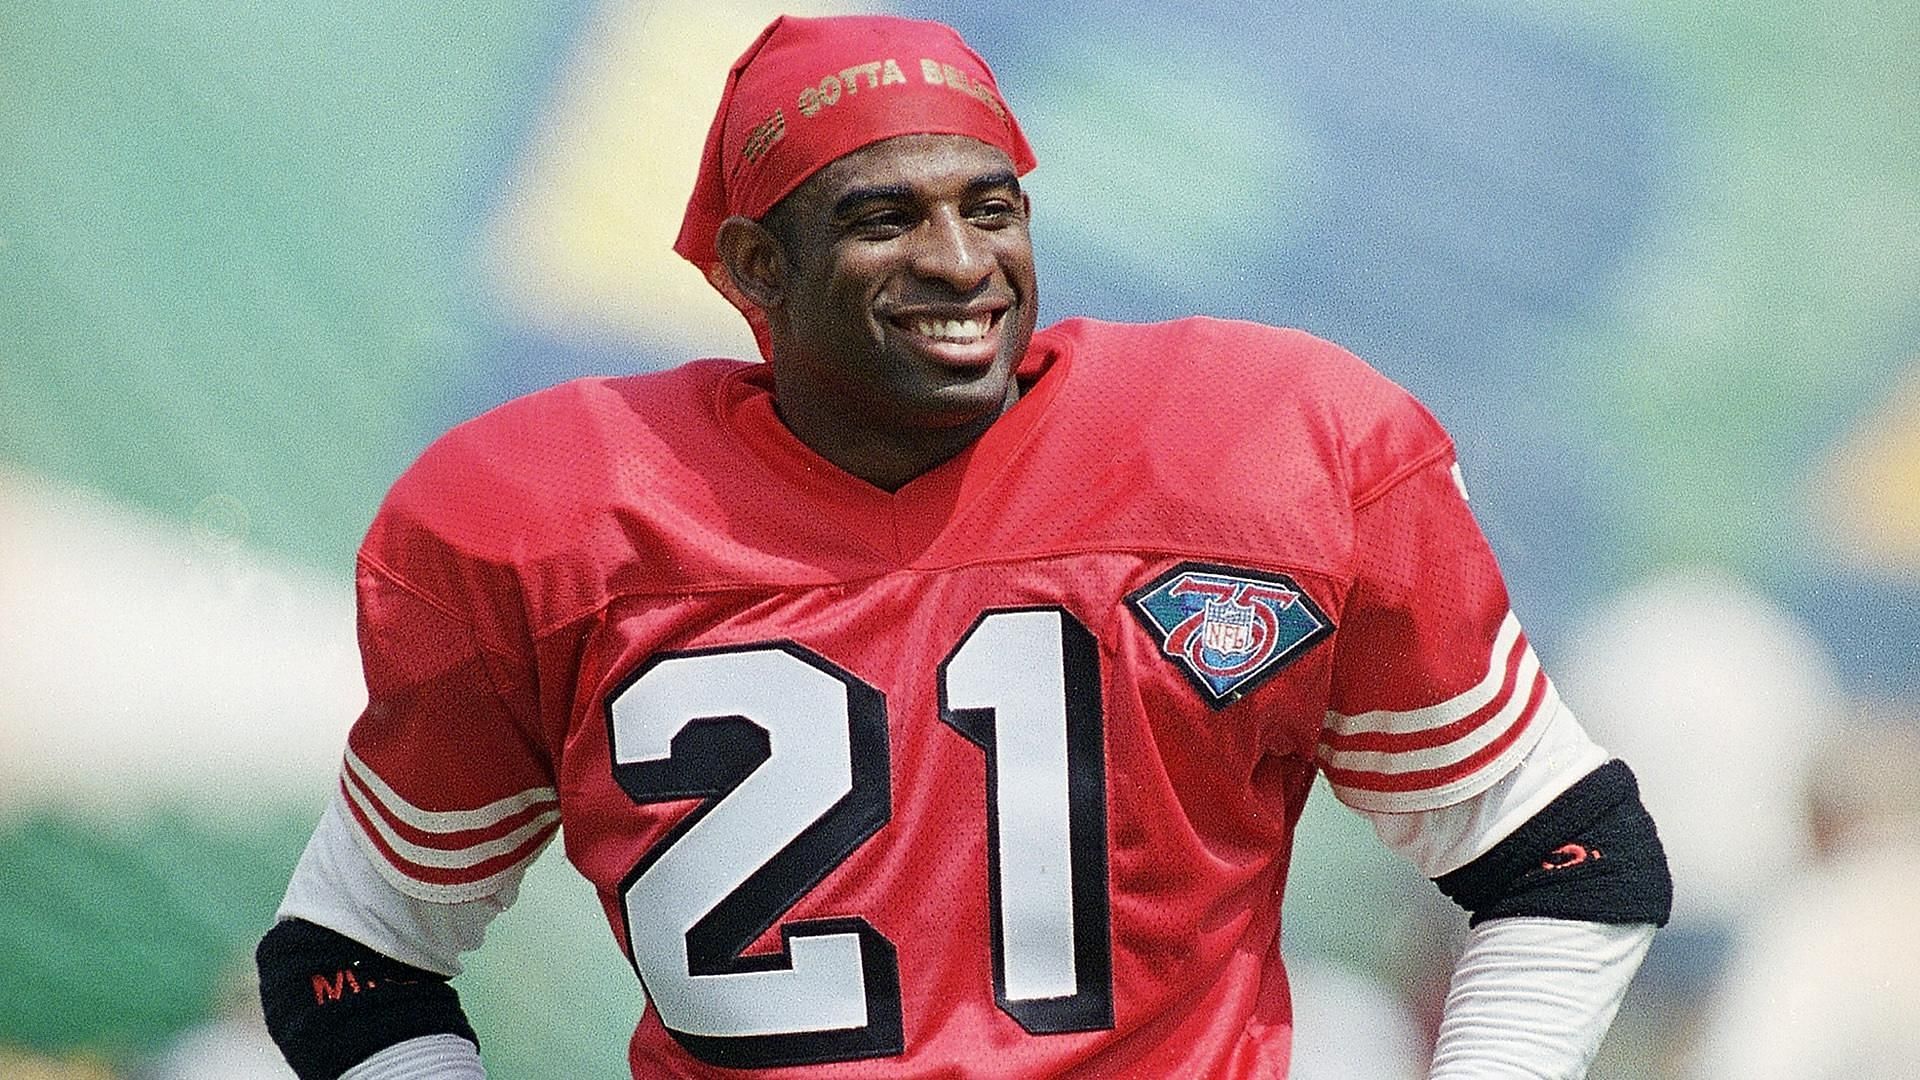 Deion Sanders for the 49ers